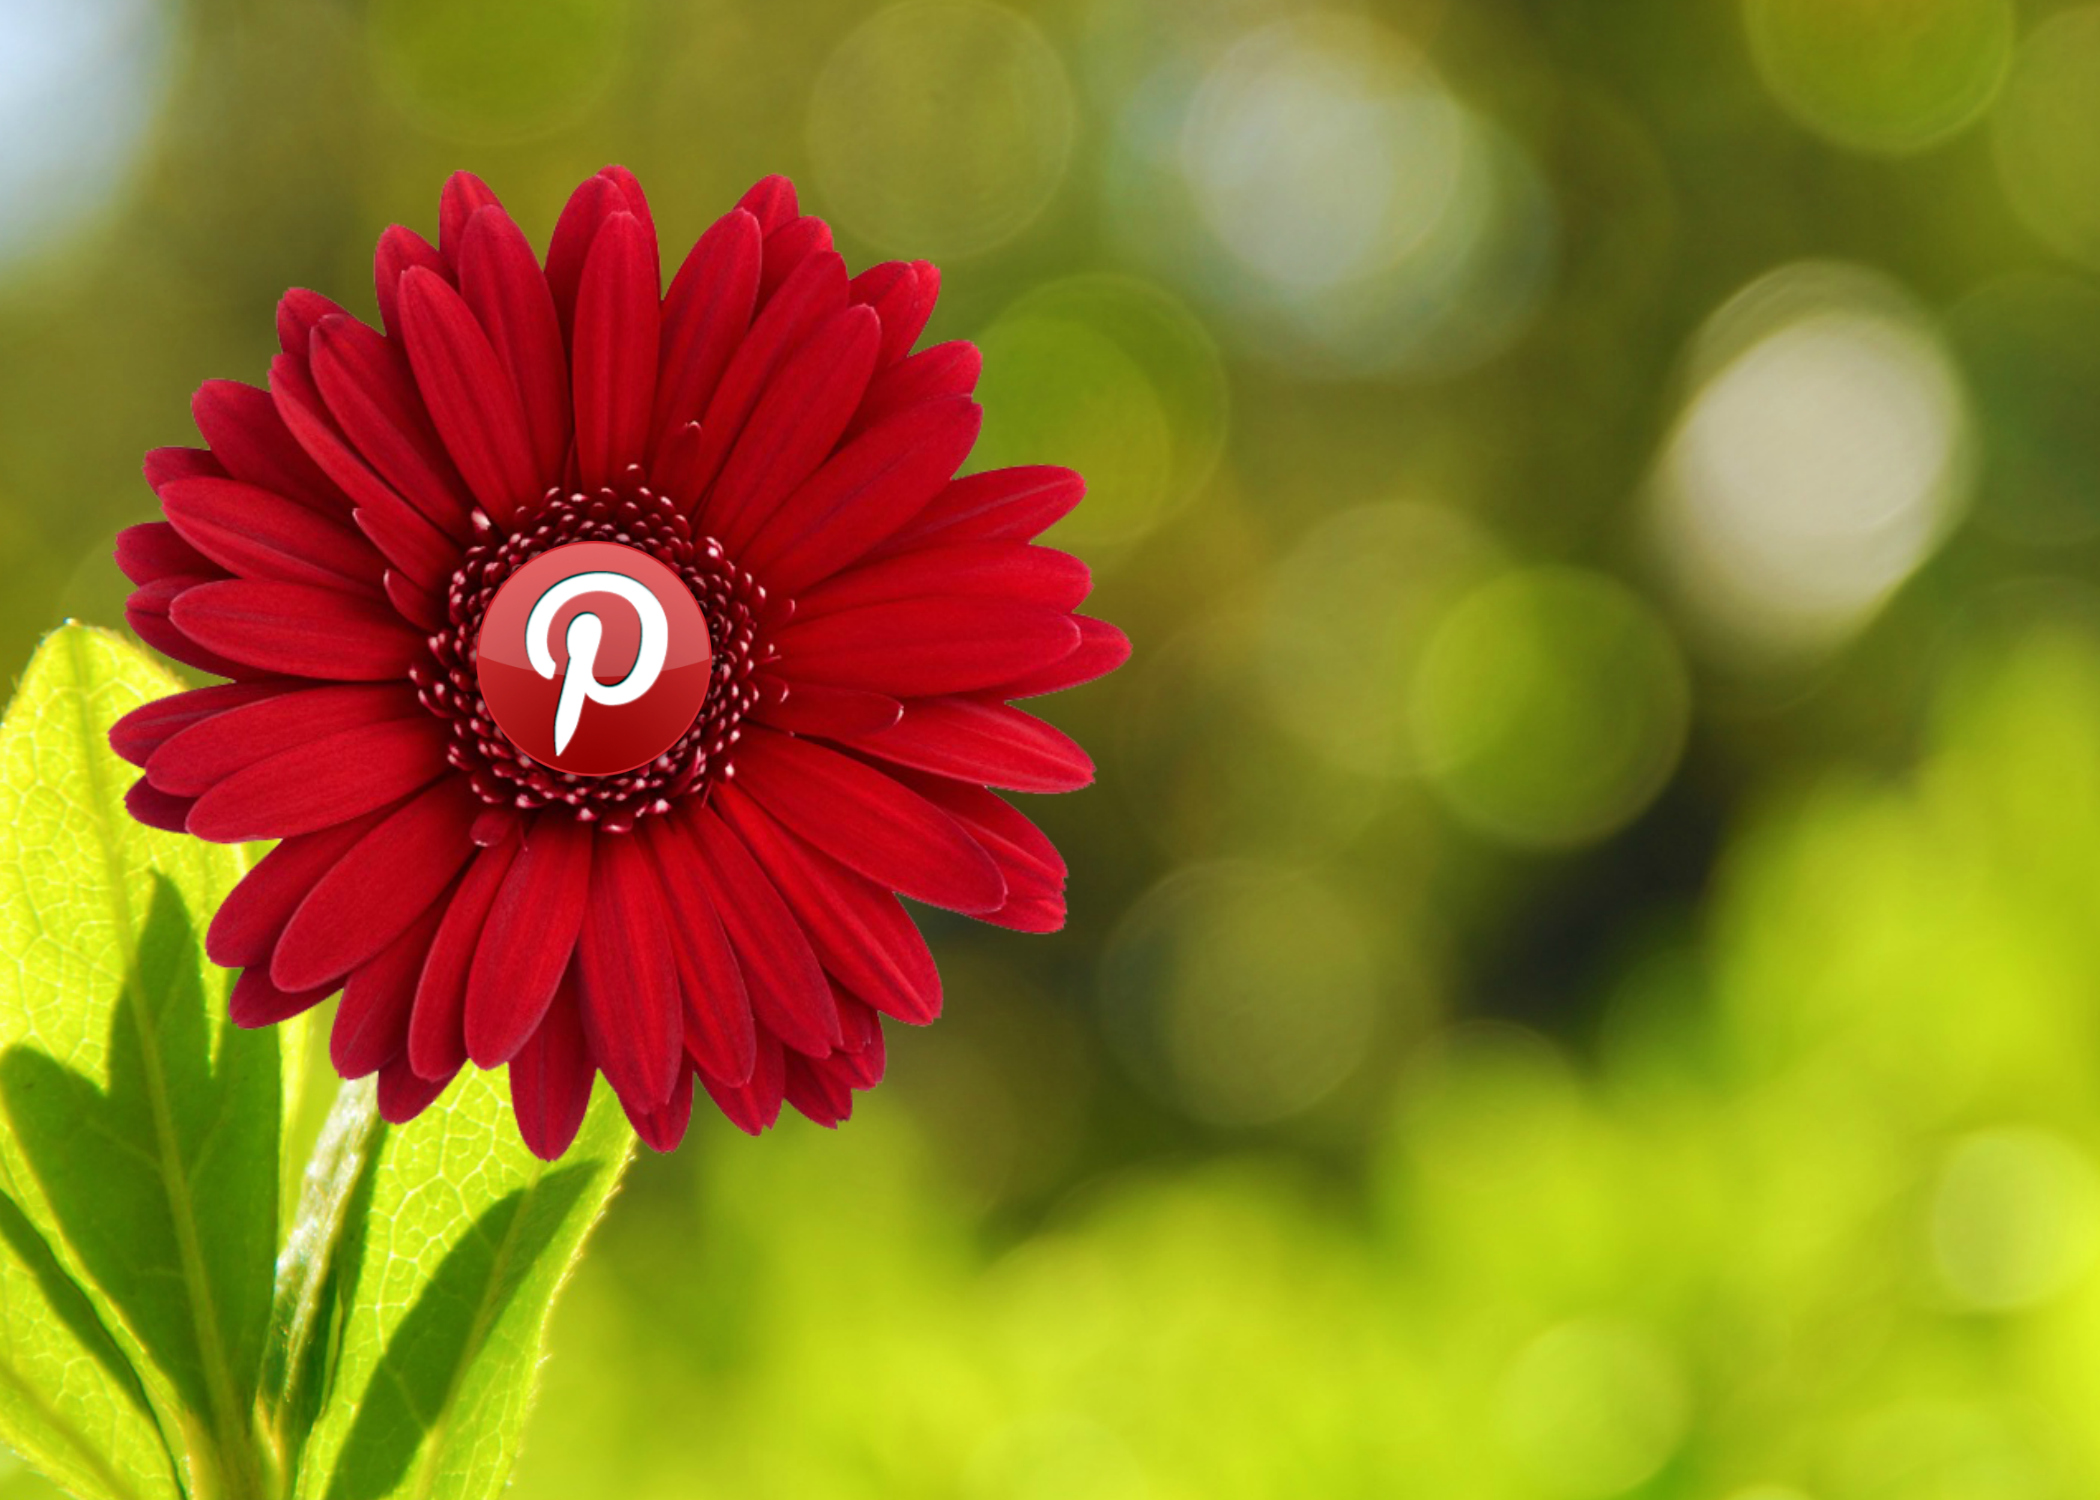 Picture of a flower with a Pinterest logo